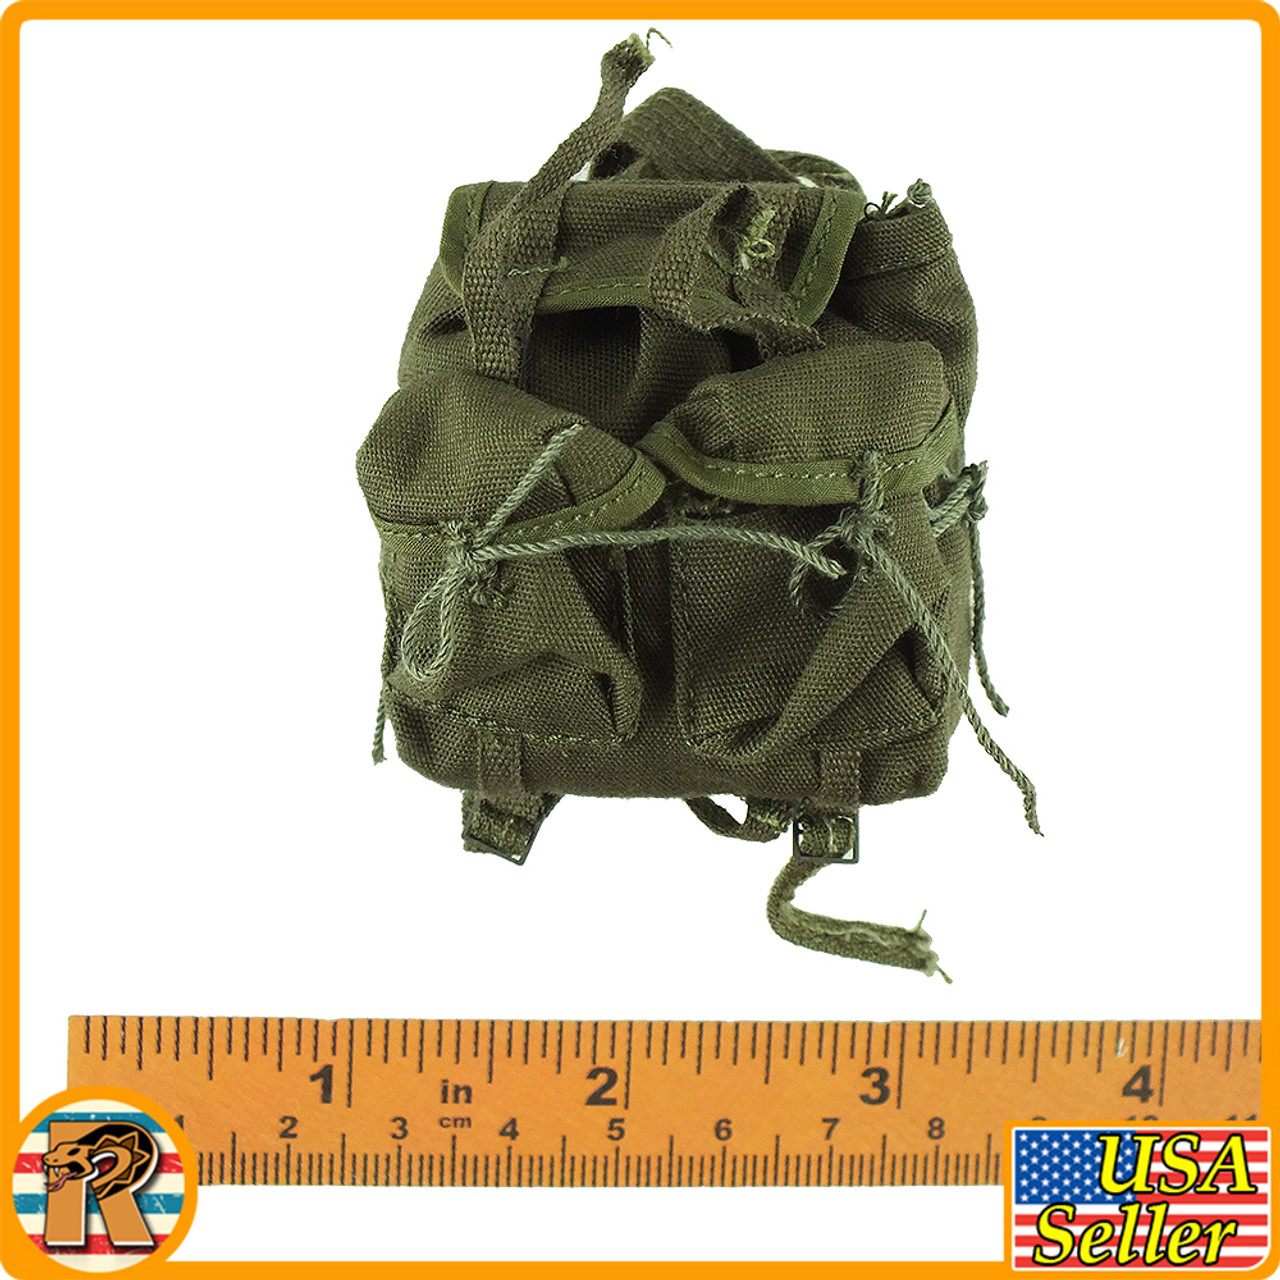 Female Vietcong Guerilla - Backpack - 1/6 Scale -